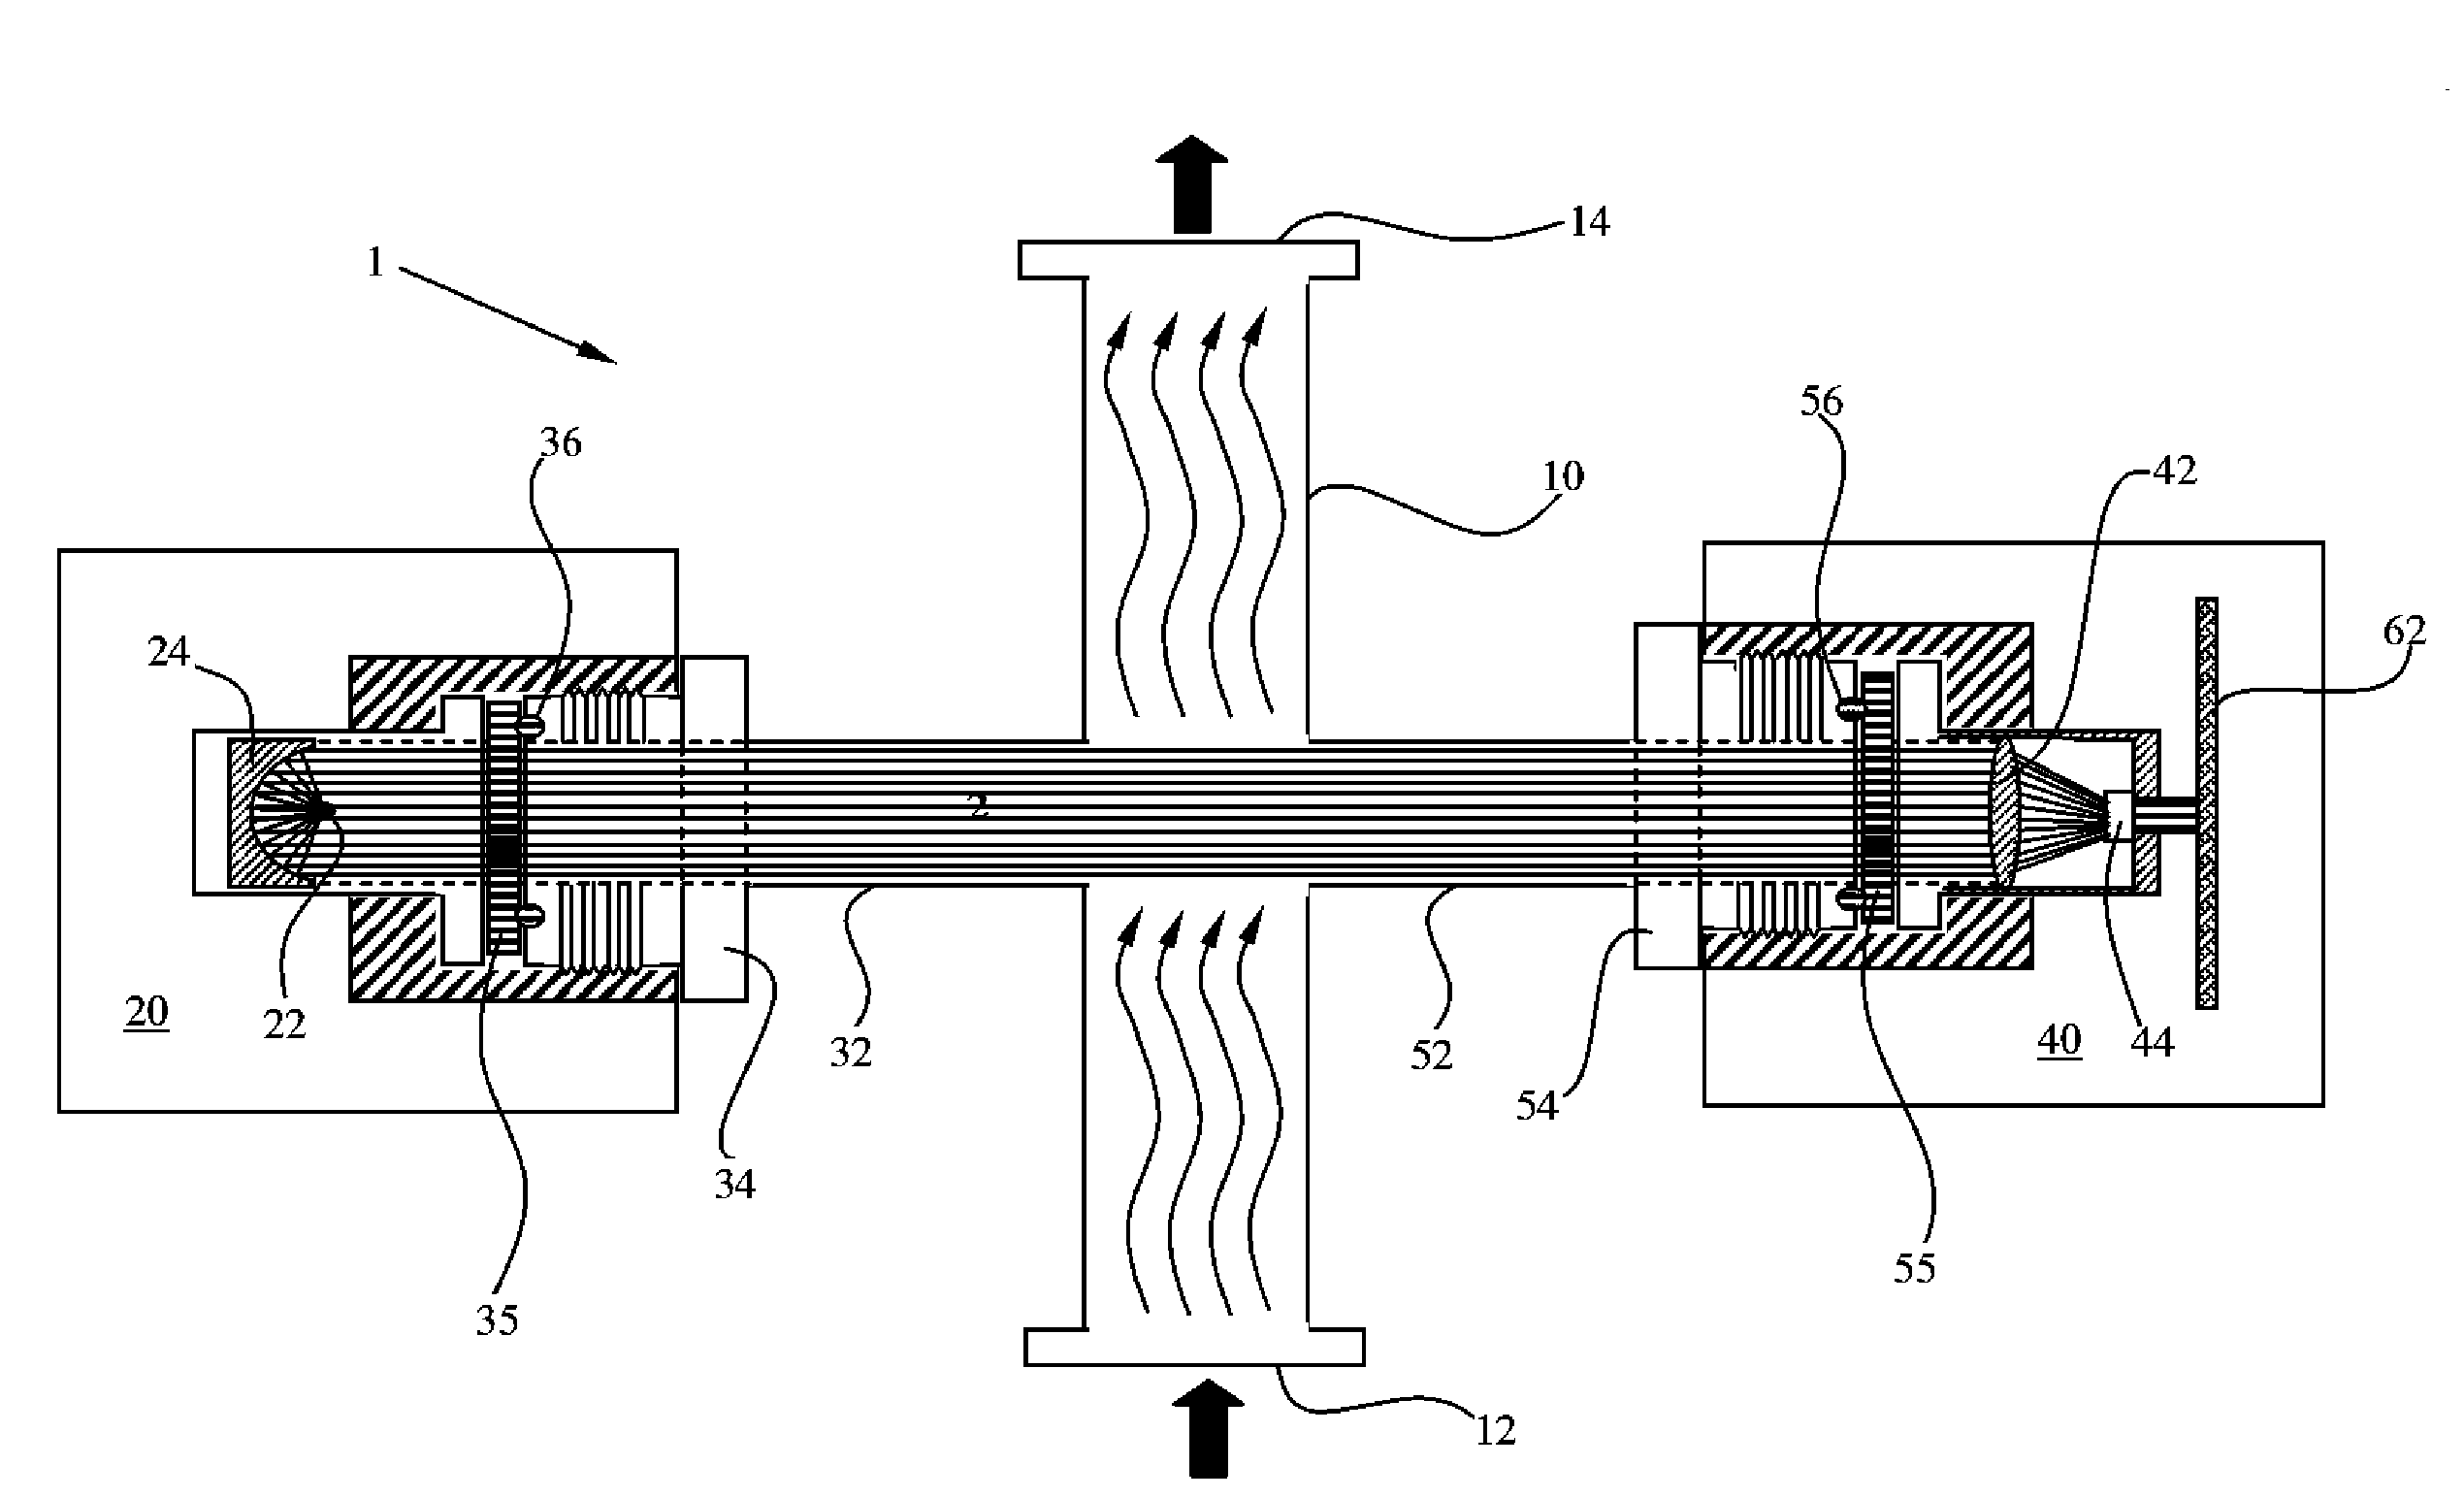 Monitoring system comprising infrared thermopile detector